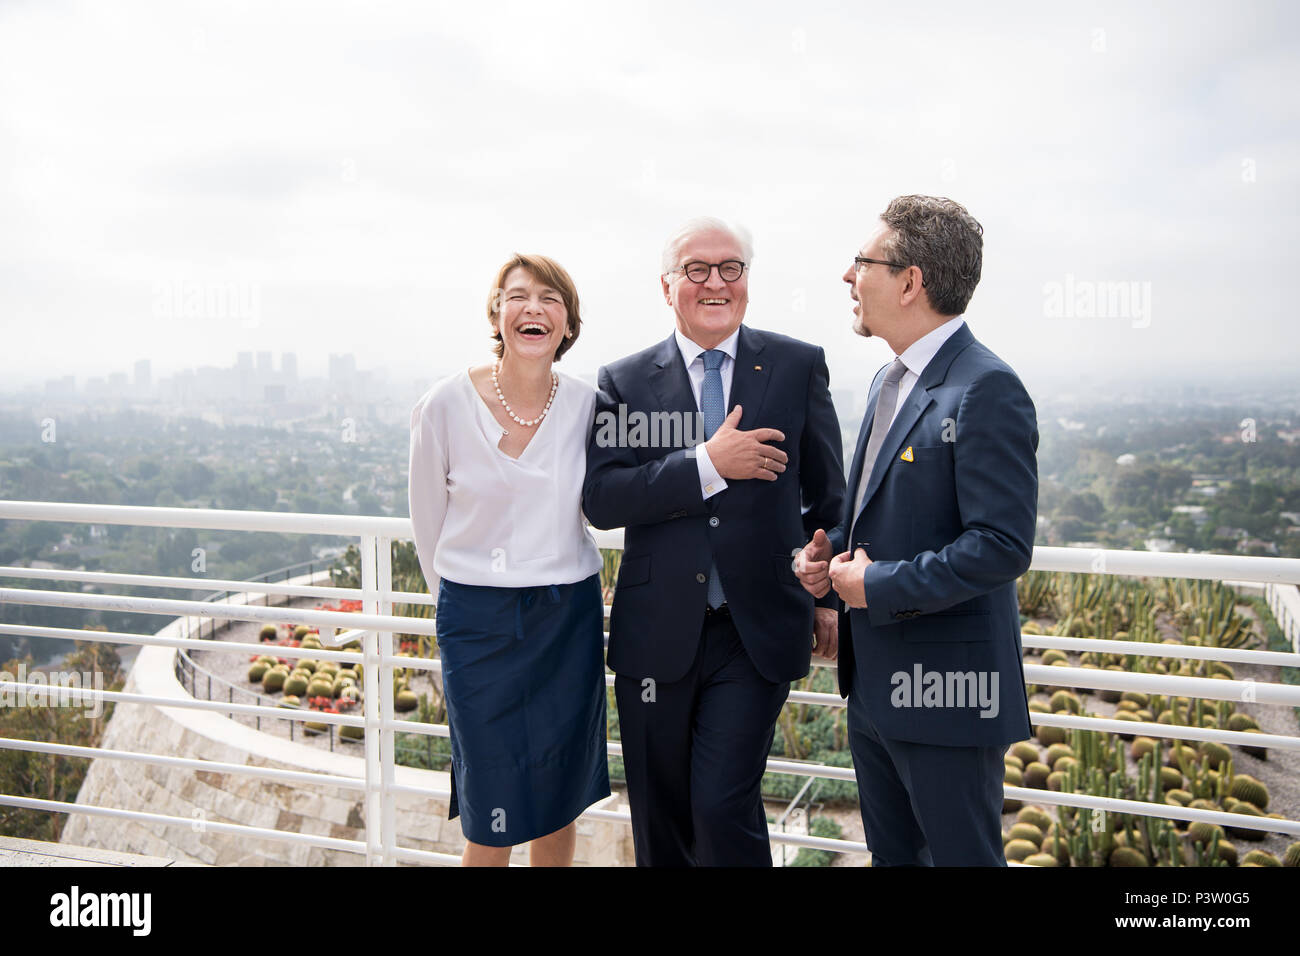 19 June 2018, USA, Los Angeles (California): German President Frank-Walter Steinmeier (C) and his wife Elke Buedenbender, are guided through the complex and the garden of the Getty Museum by the deputy director of the Getty Research Institute, Andrew Perchuk (R). President Steinmeier and his wife are on a three day visit to California. Photo: Bernd von Jutrczenka/dpa Stock Photo